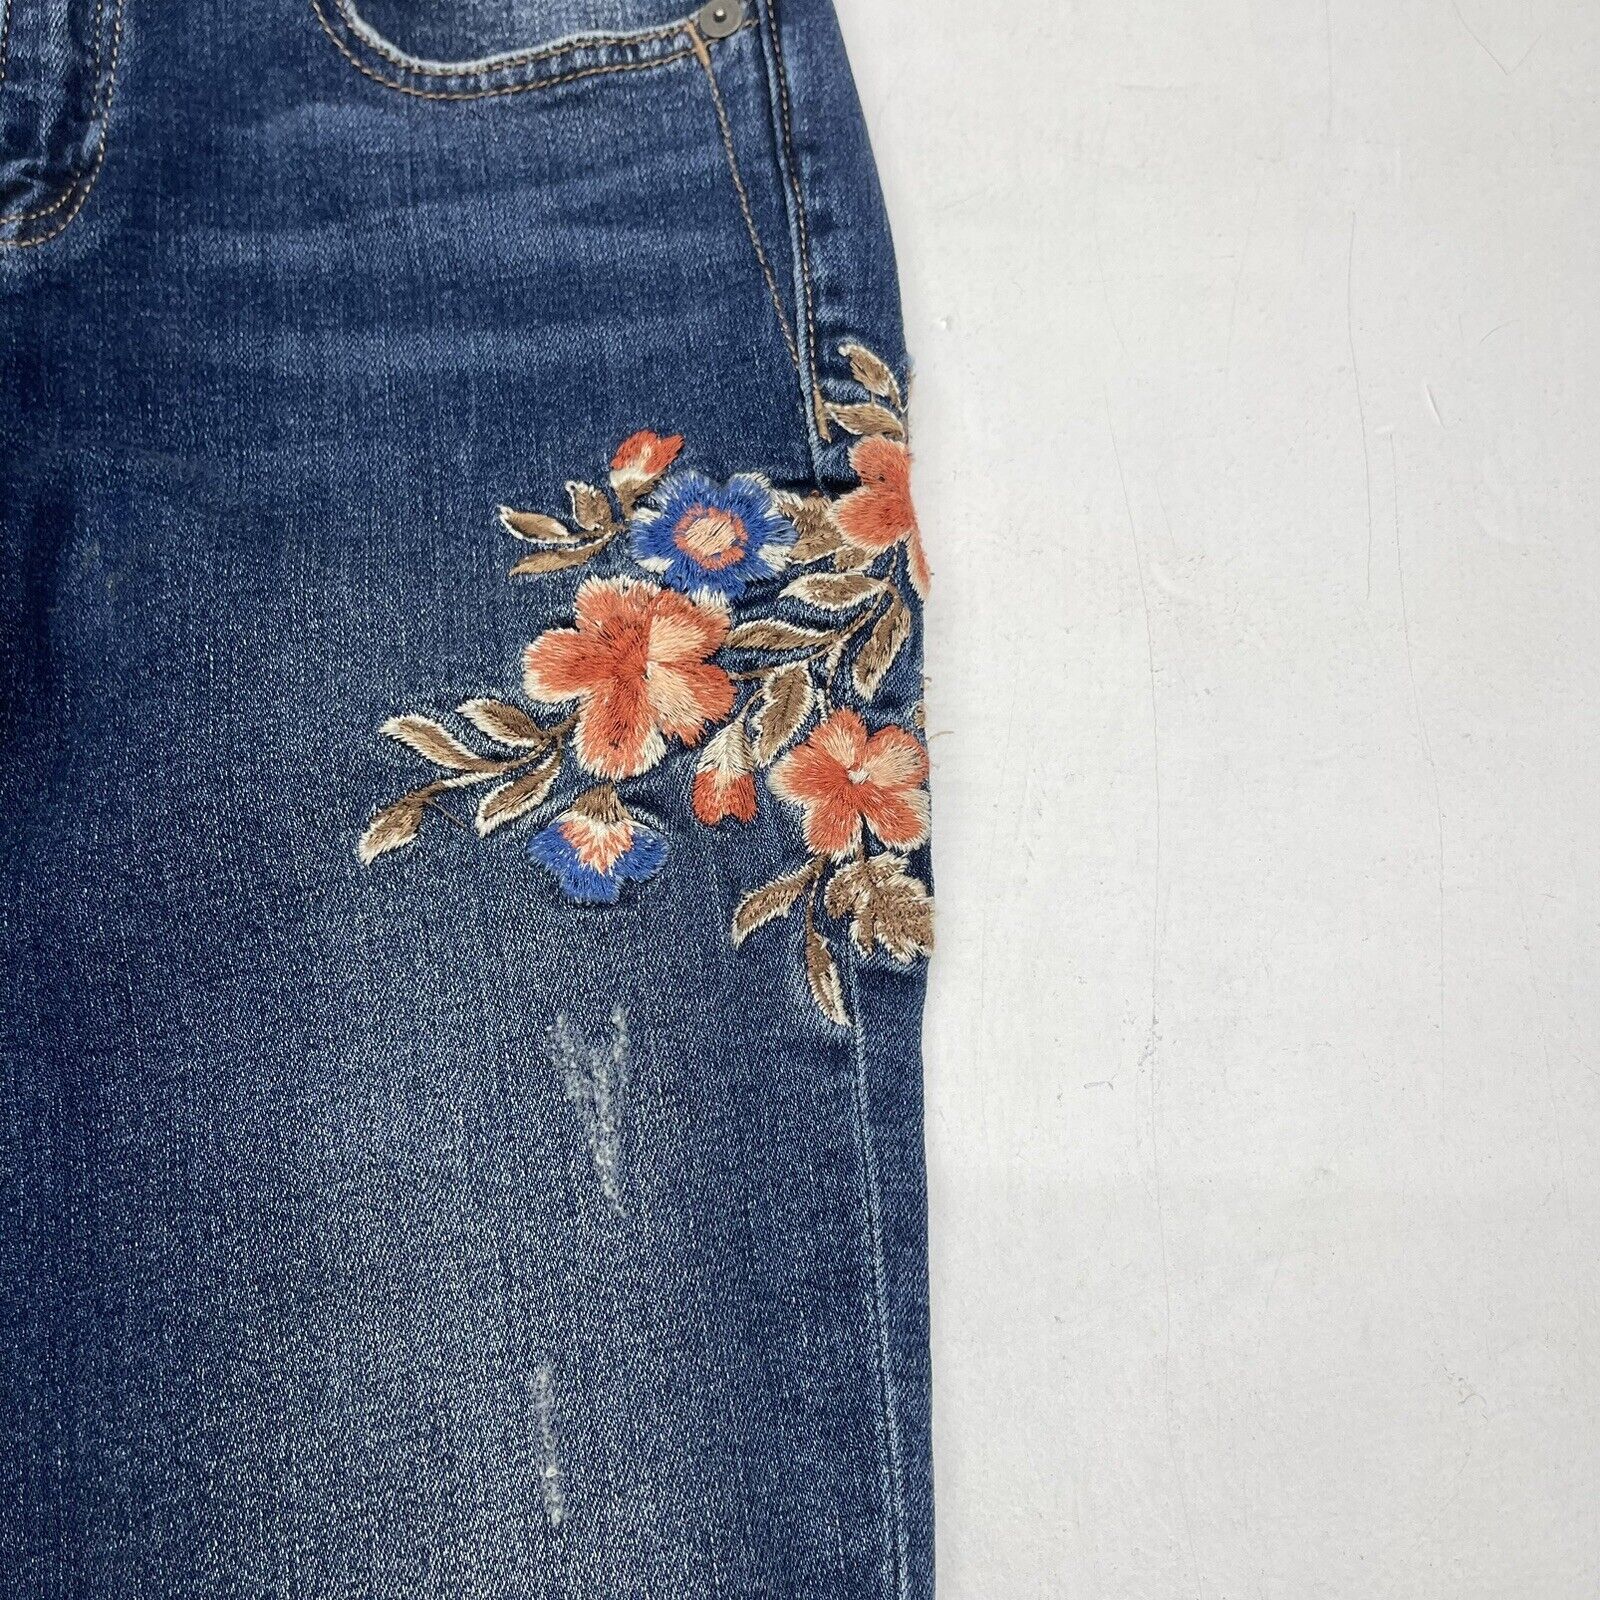 Flower Embroidered Jeans, Womens Bell Bottom Jeans